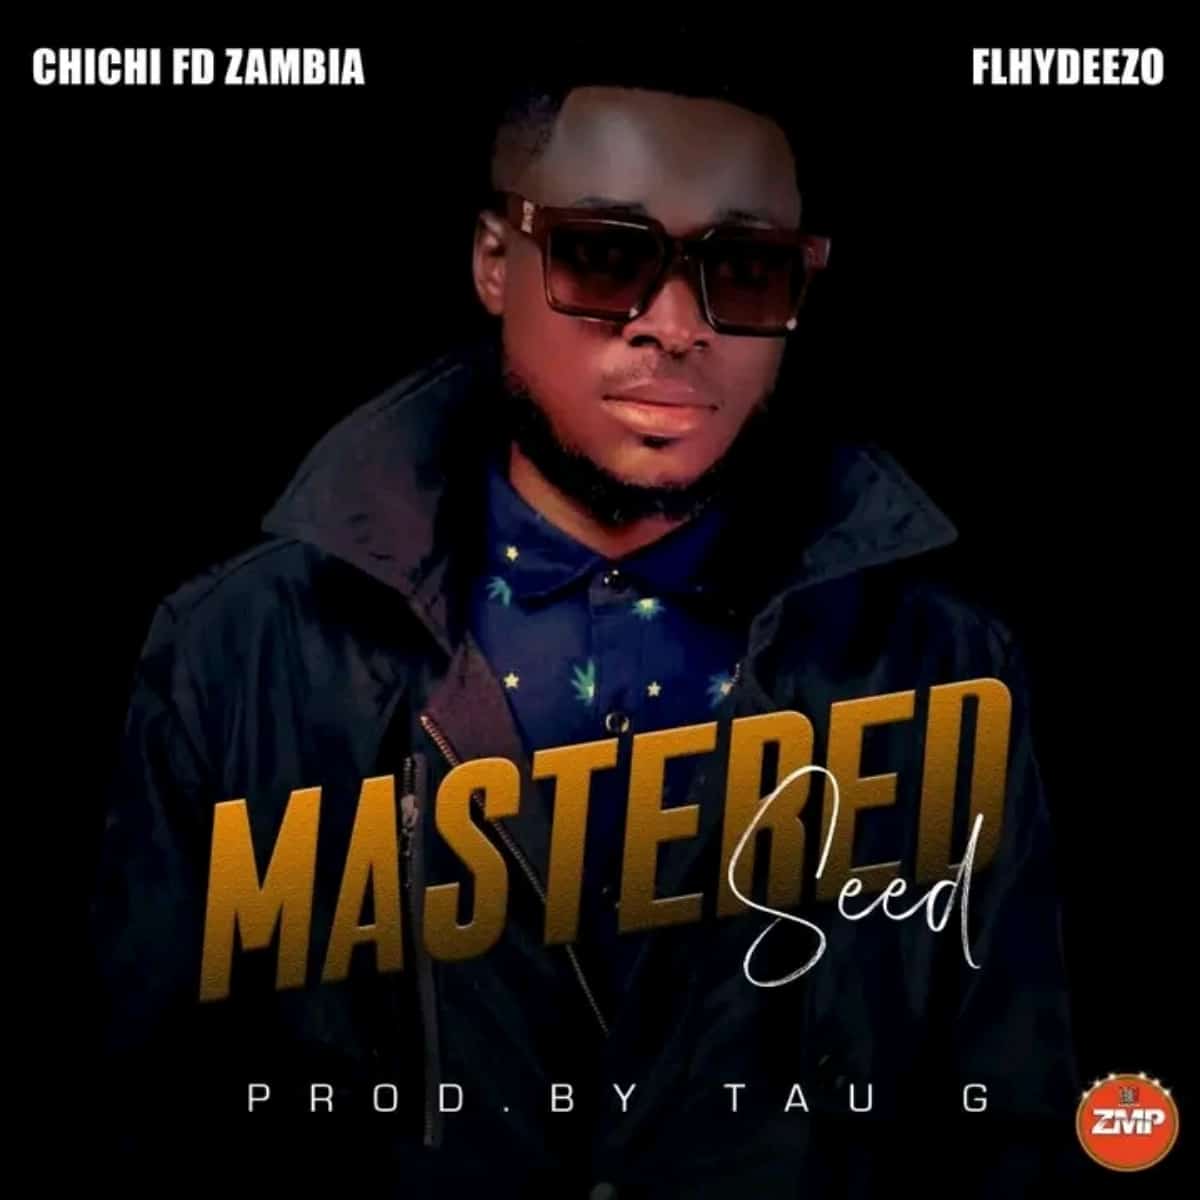 DOWNLOAD: Chichi Fd Zambia Ft. Flhydeezo – “Mastered Seed” Mp3